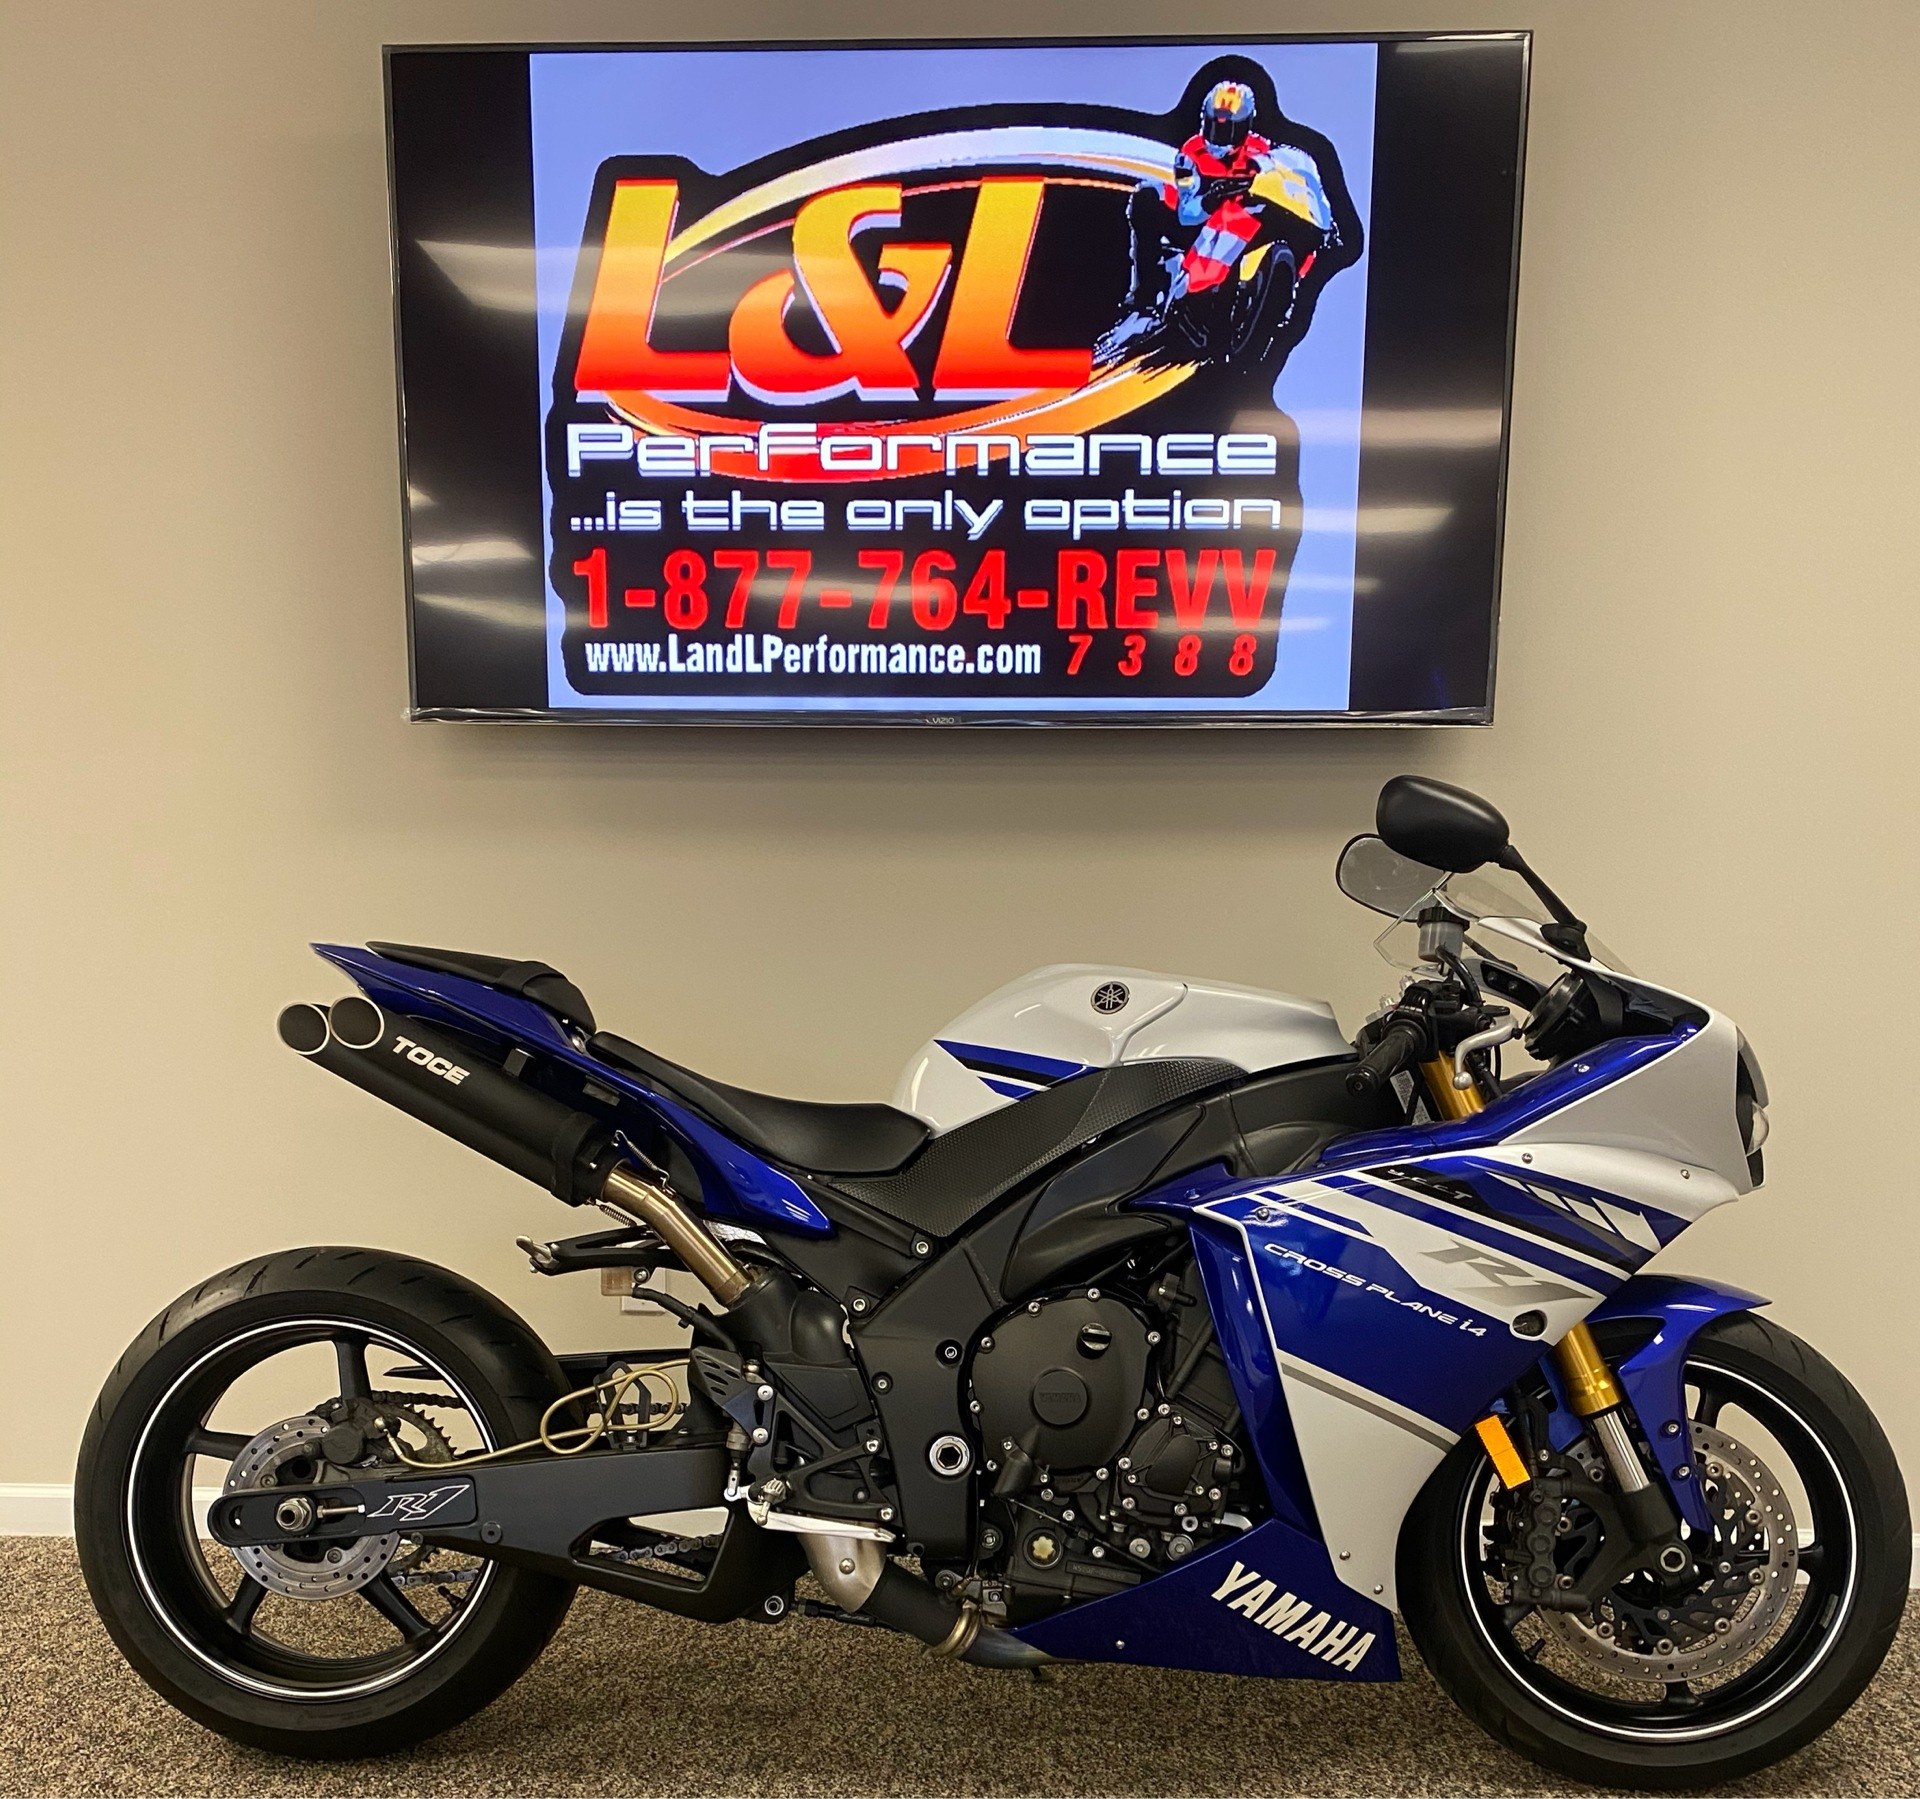 L & L Performance, LLC Inventory - Dealer in Cary, NC 27511